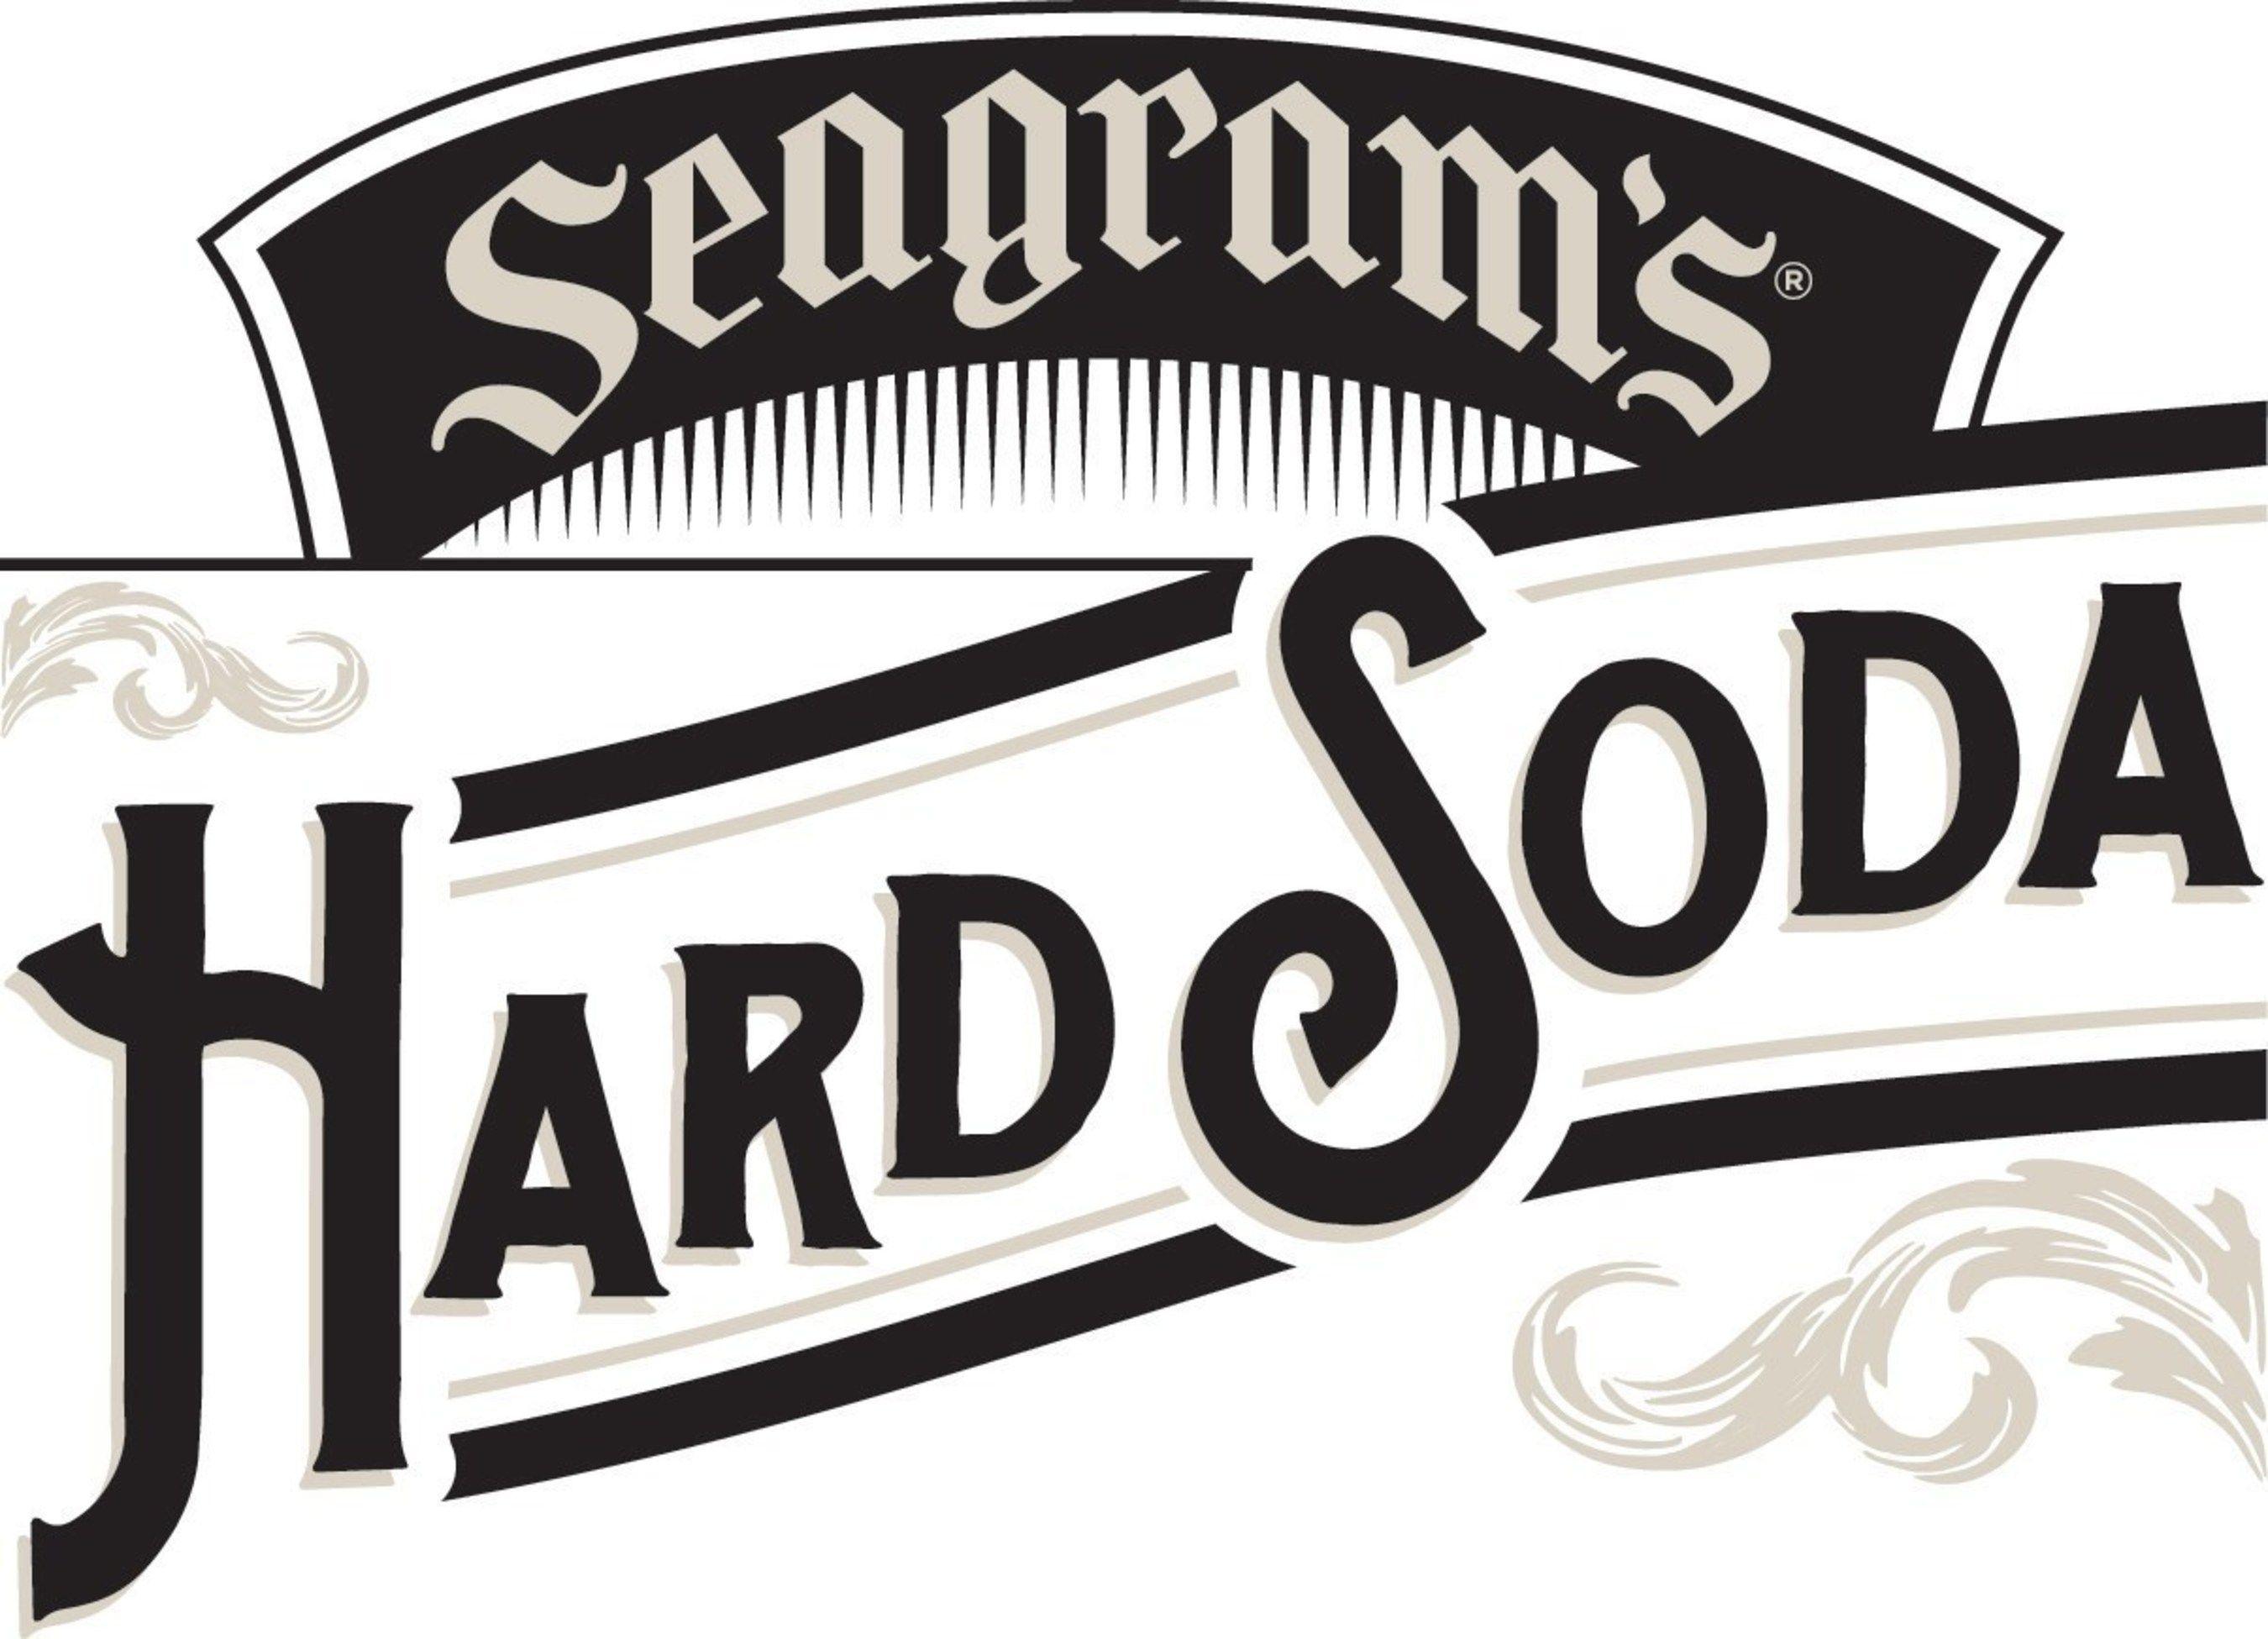 Seagram's Logo - Seagram's Introduces All-New Hard Soda in Variety of Delicious Flavors